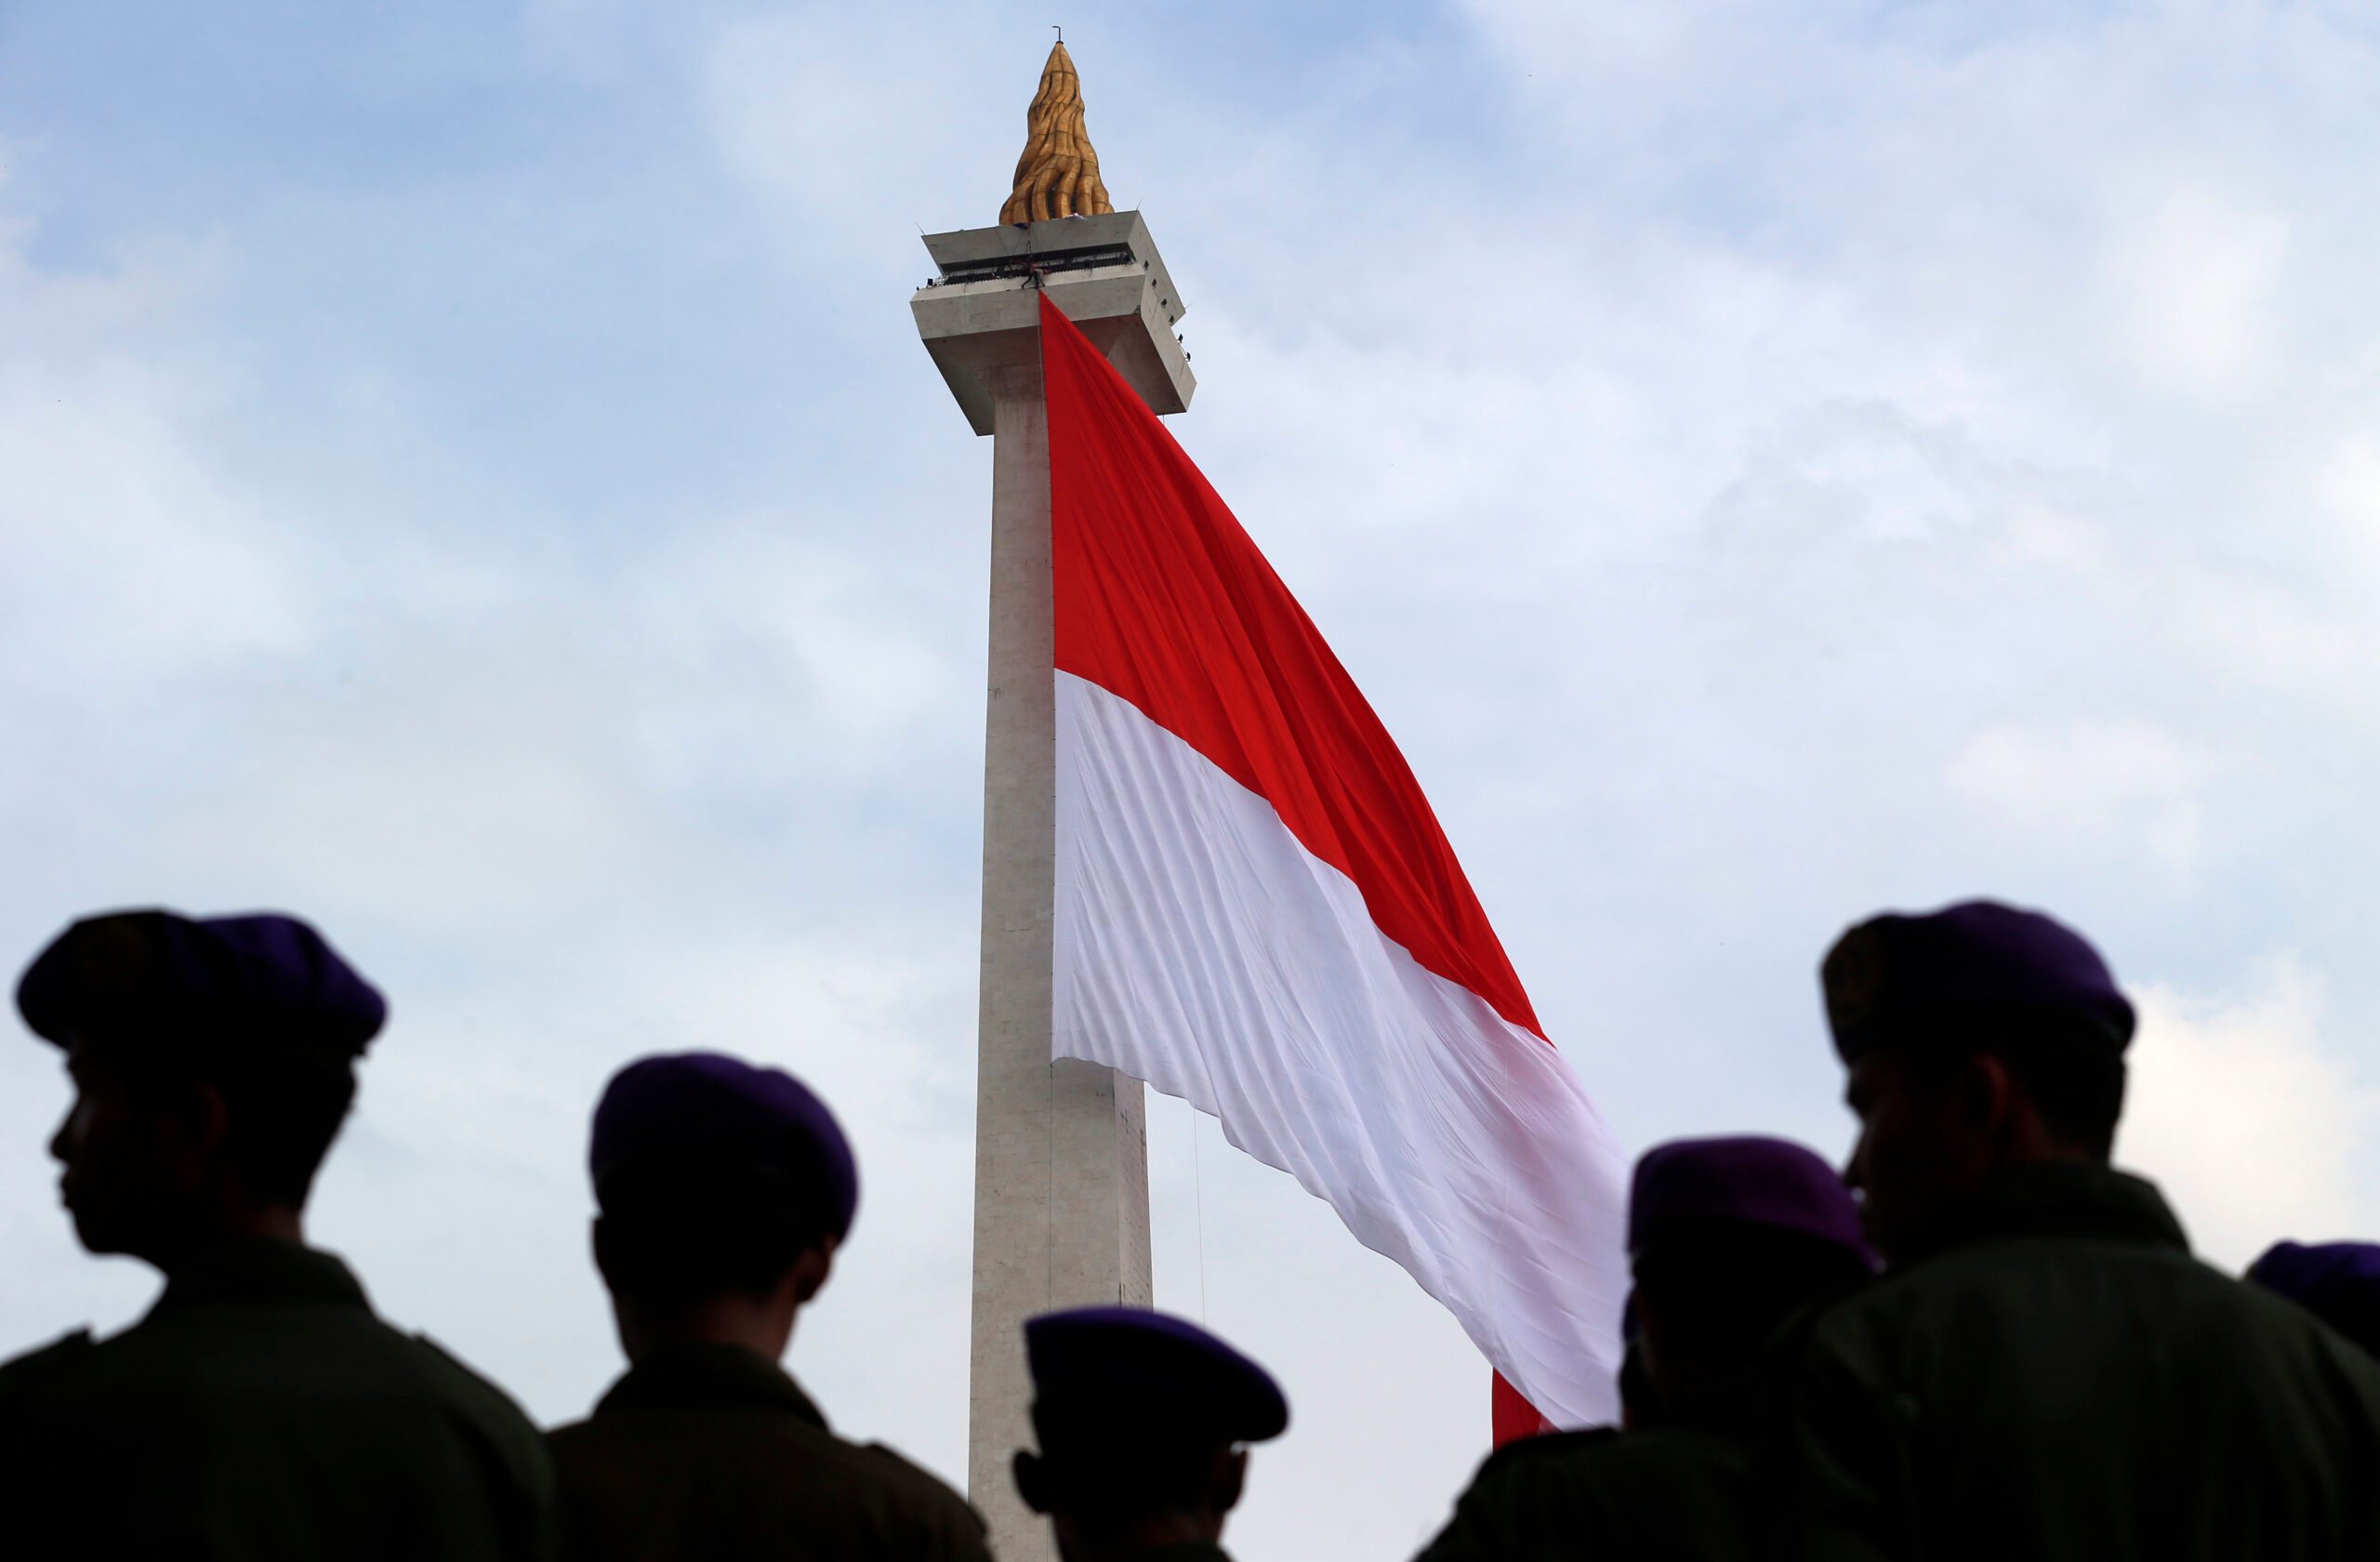 A look at religion in Indonesia 71 years since independence